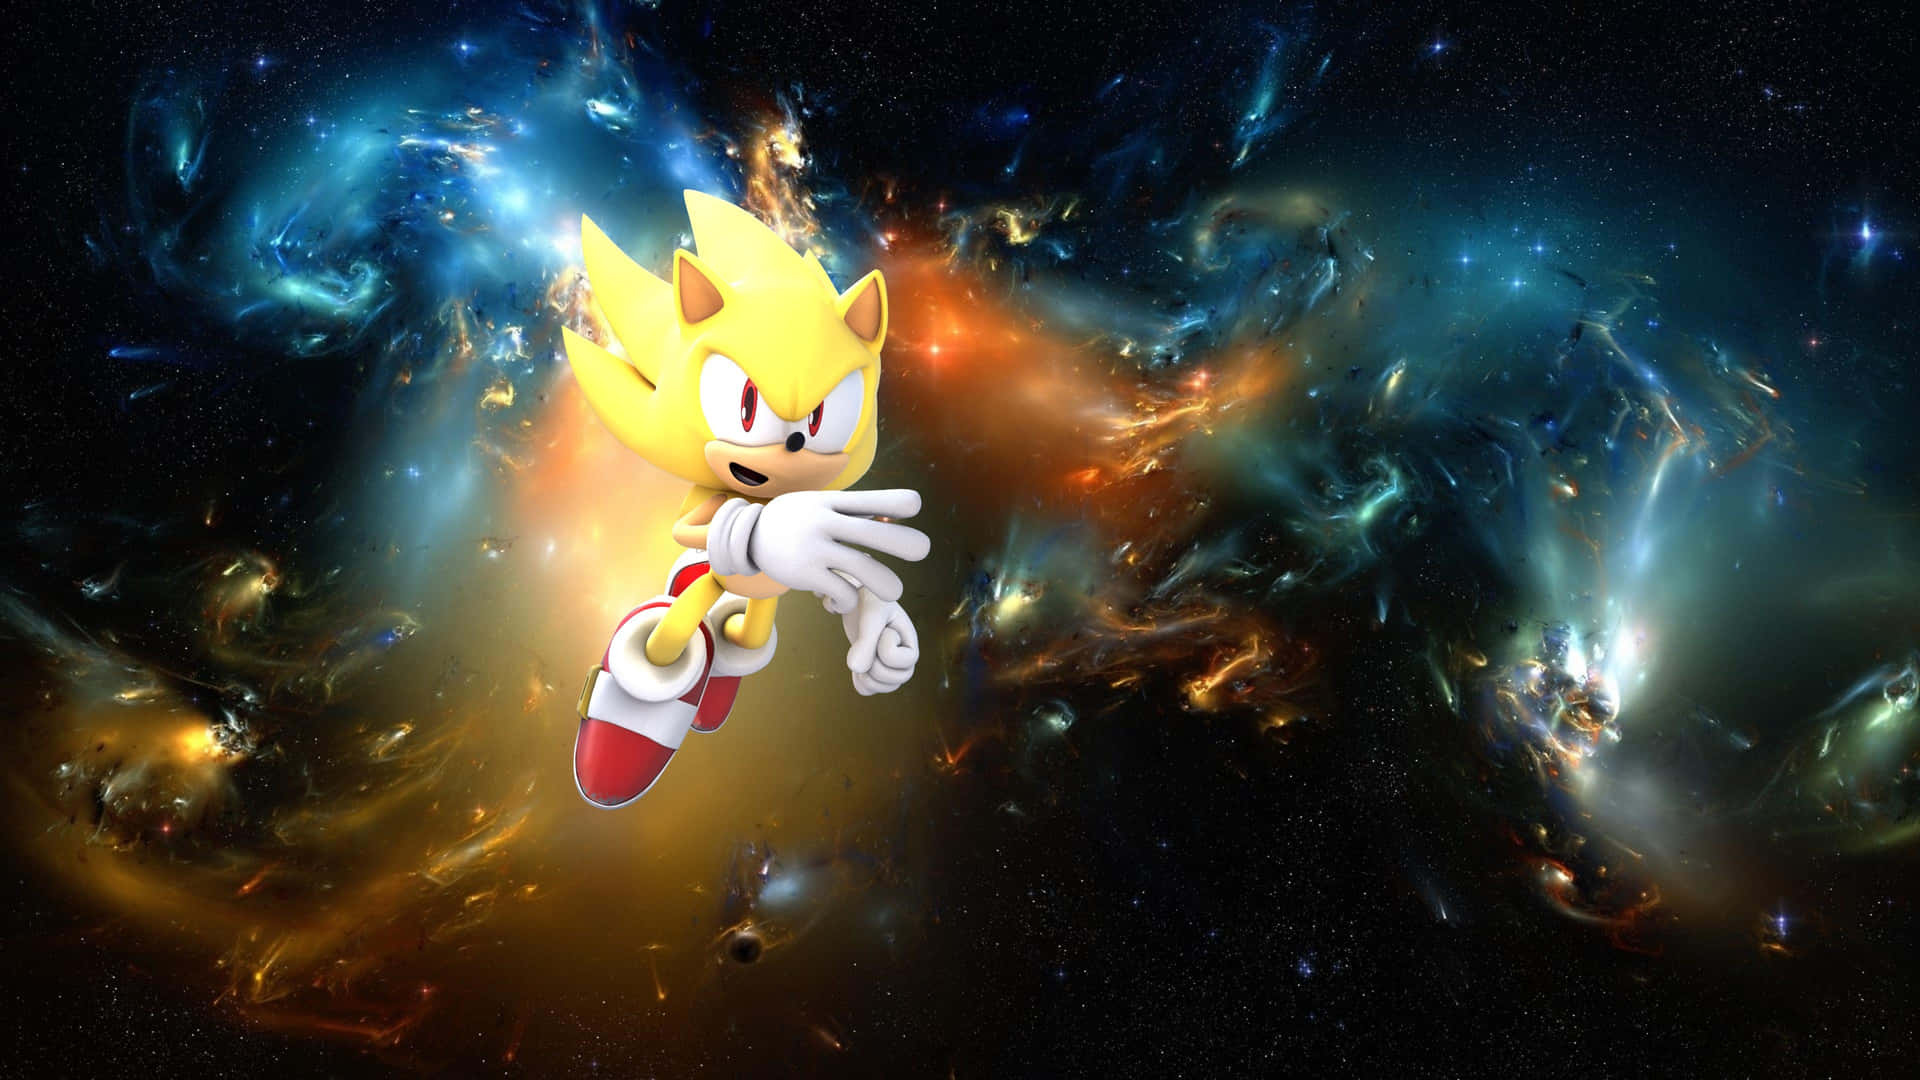 Sonic The Hedgehog In Space With A Galaxy Background Wallpaper